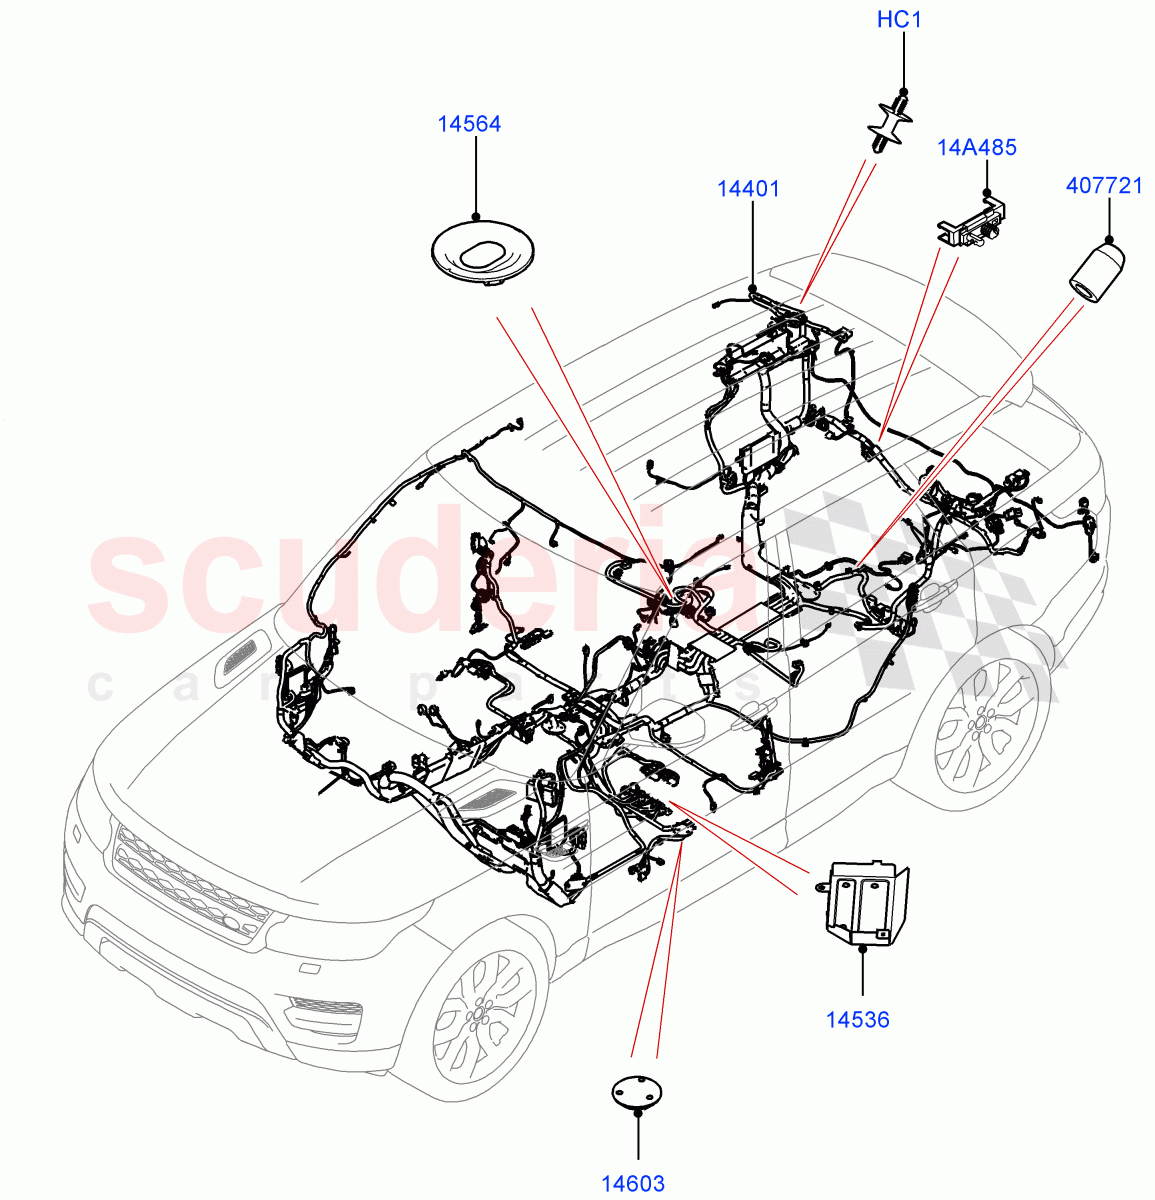 Electrical Wiring - Engine And Dash(Main Harness)((V)TOEA999999) of Land Rover Land Rover Range Rover Sport (2014+) [2.0 Turbo Diesel]